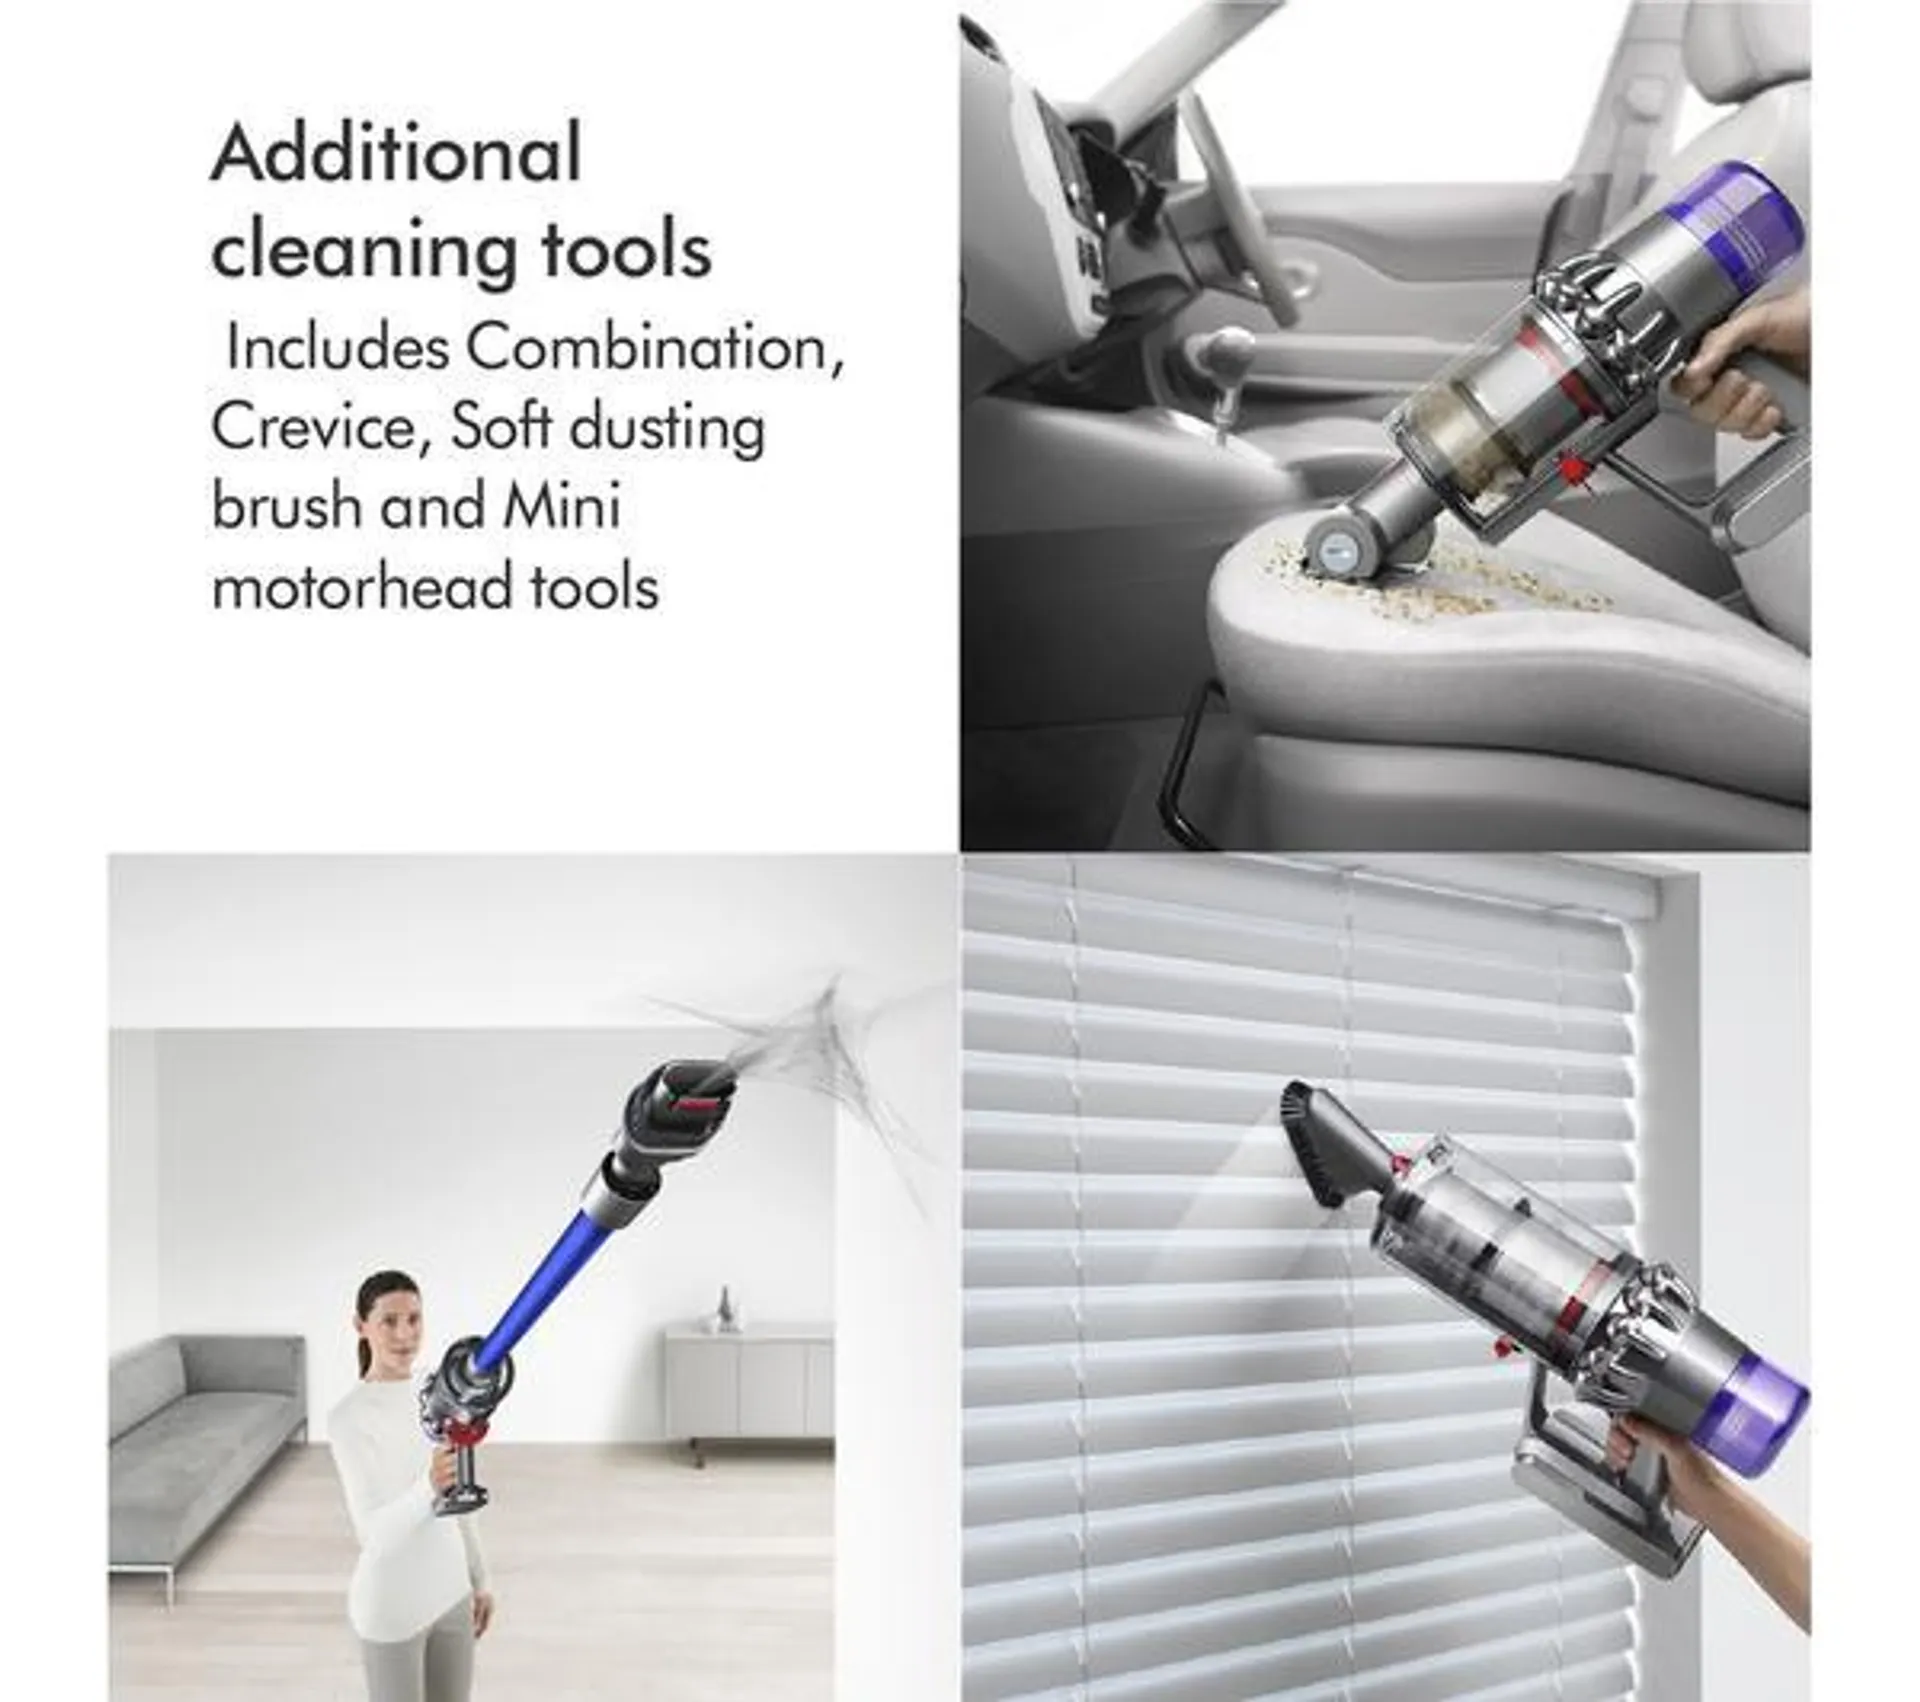 DYSON V11 Absolute Cordless Vacuum Cleaner - Nickel & Copper